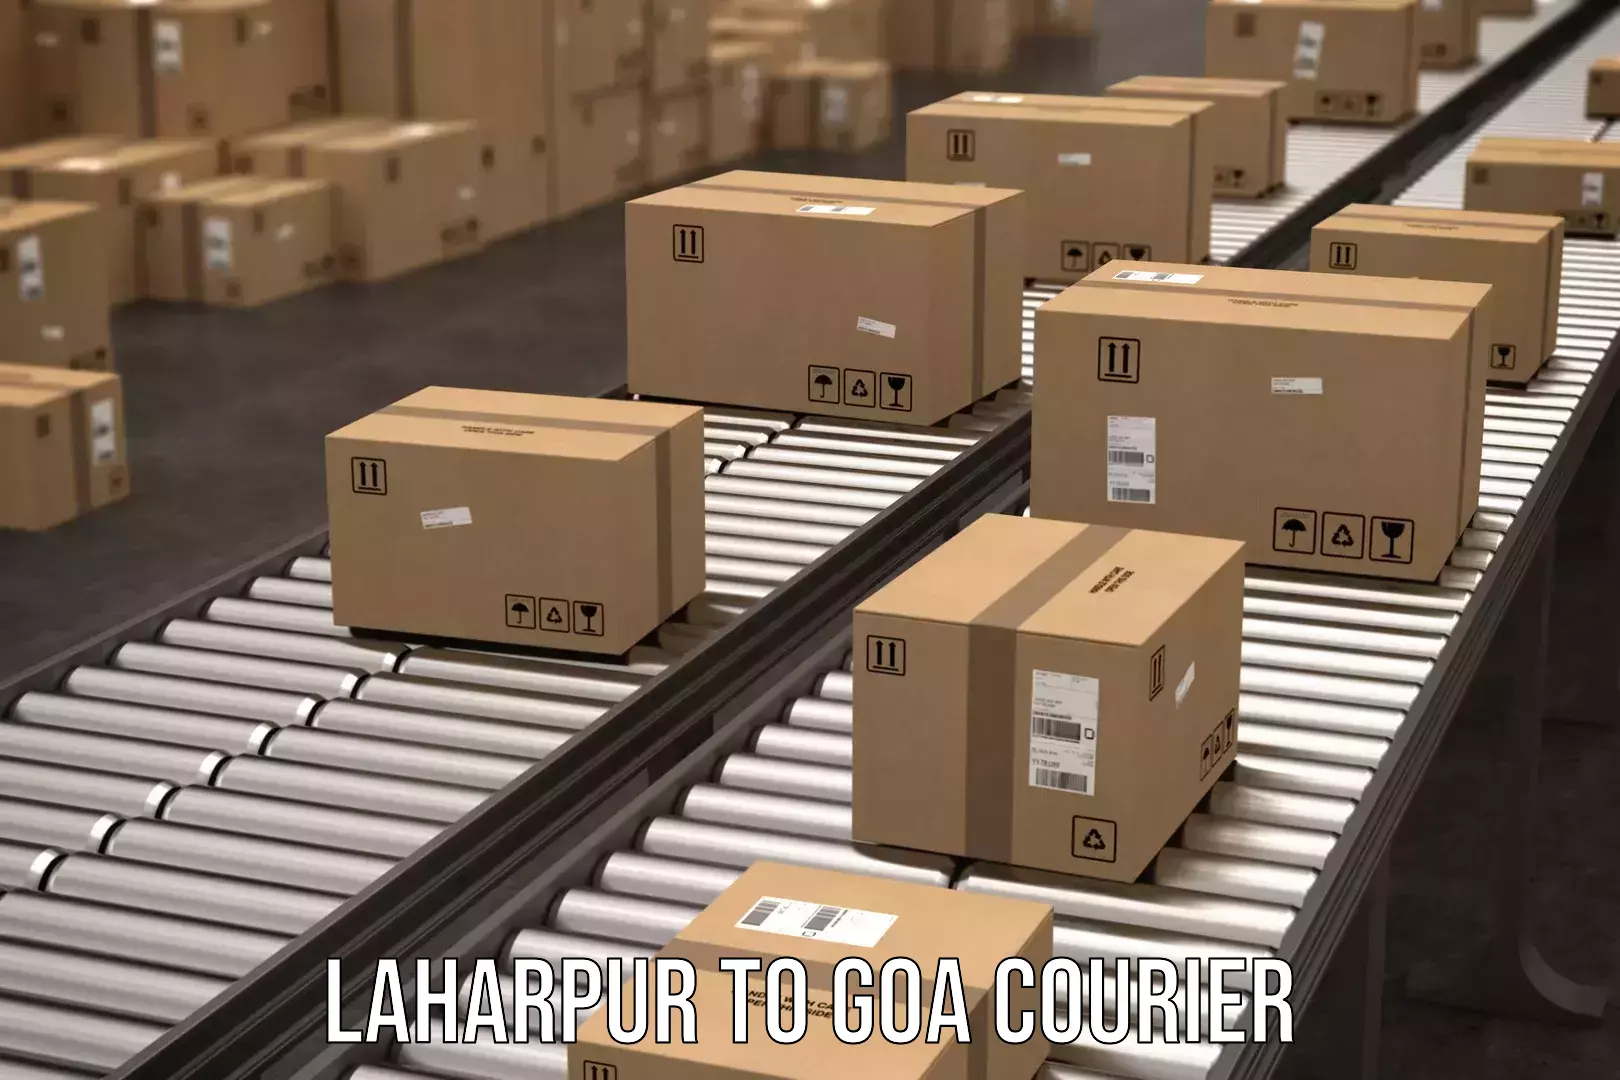 24-hour courier service Laharpur to Margao